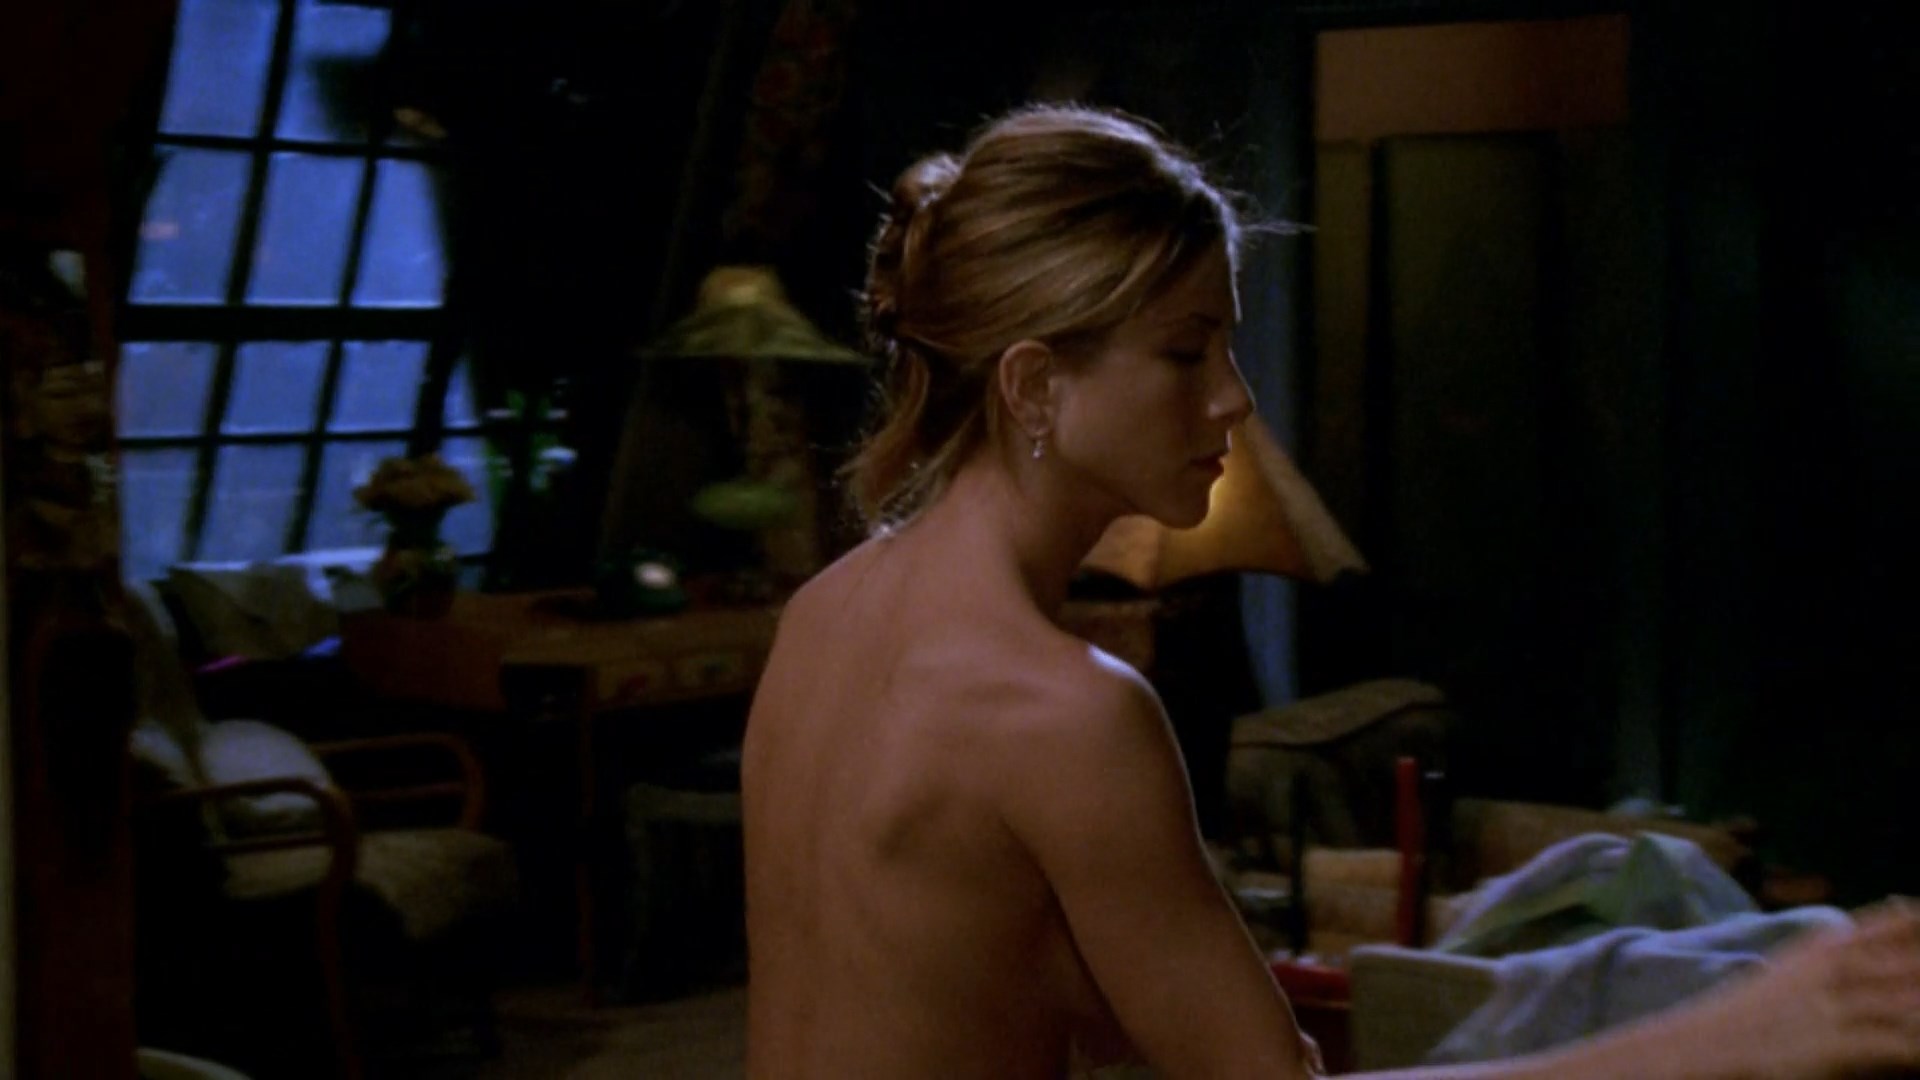 Best of Jennifer aniston nude marley and me